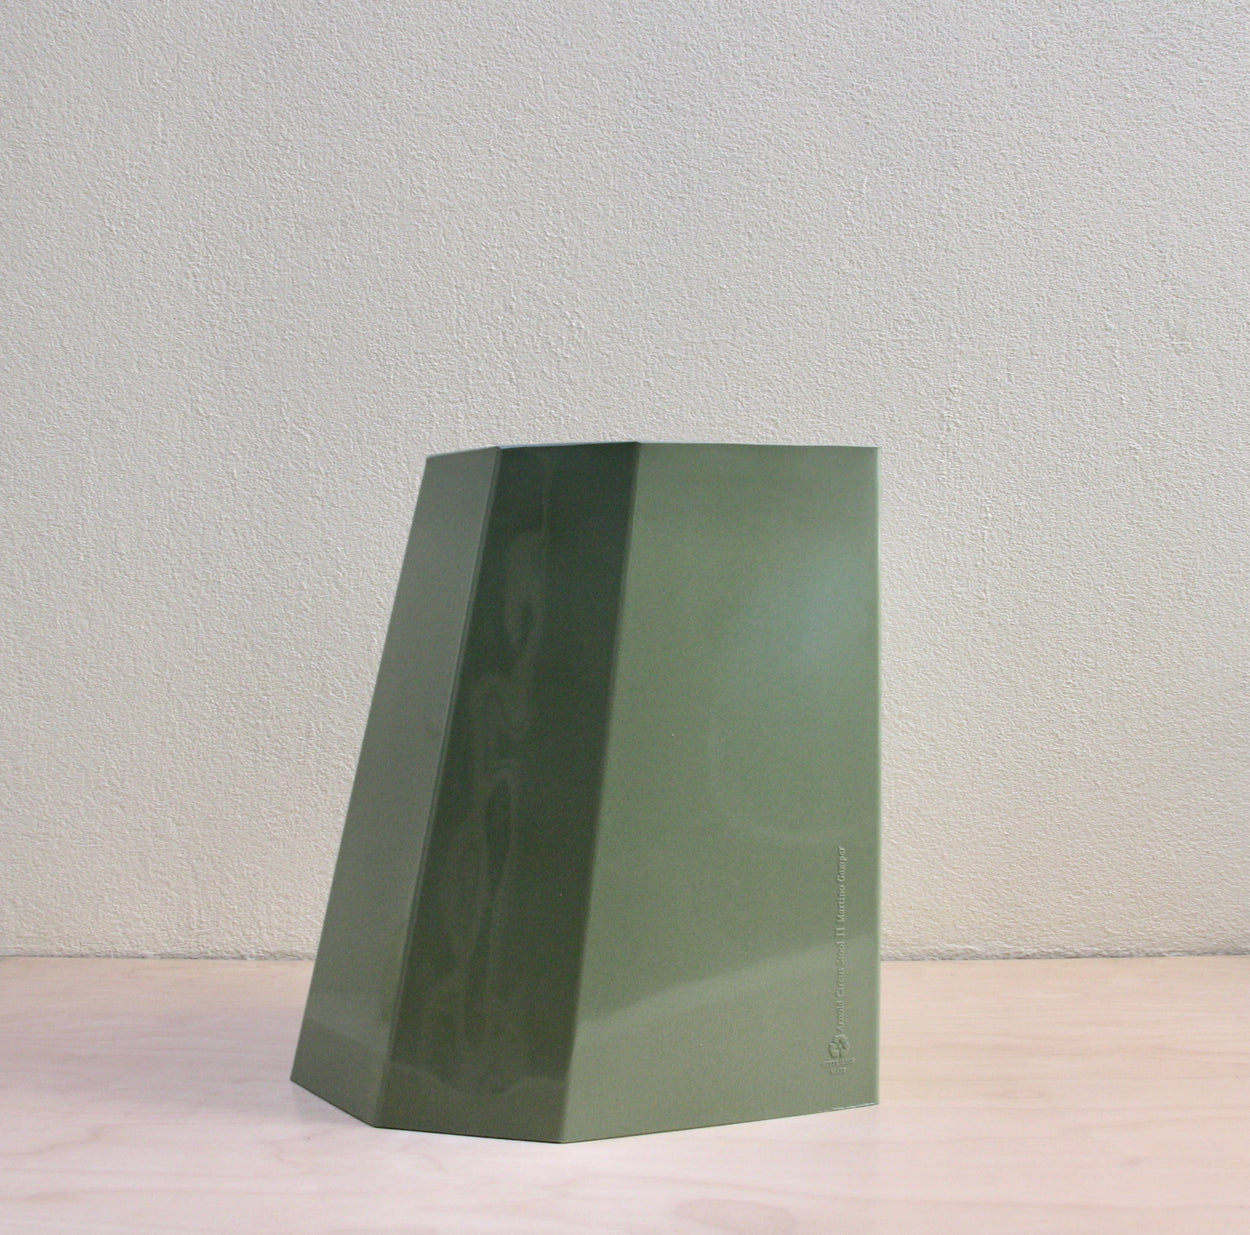 Martino Gamper Arnold Circus Stool in Pale Eucalypt Green side profile